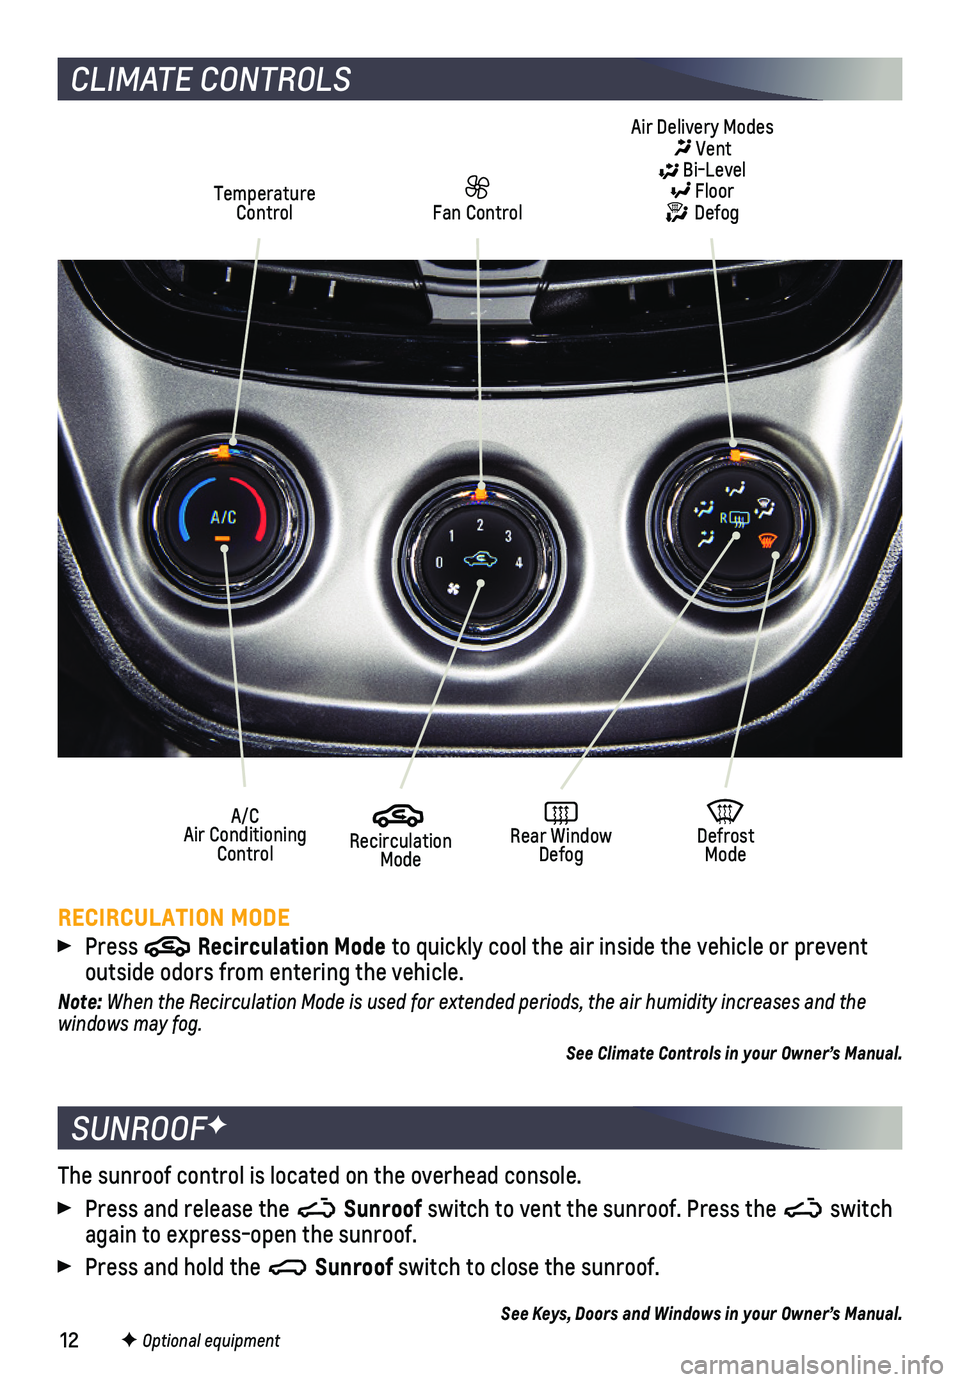 CHEVROLET SPARK 2021  Get To Know Guide 12
CLIMATE CONTROLS
RECIRCULATION MODE
 Press  Recirculation Mode to quickly cool the air inside the vehicle or prevent  
outside odors from entering the vehicle.
Note: When the Recirculation Mode is 